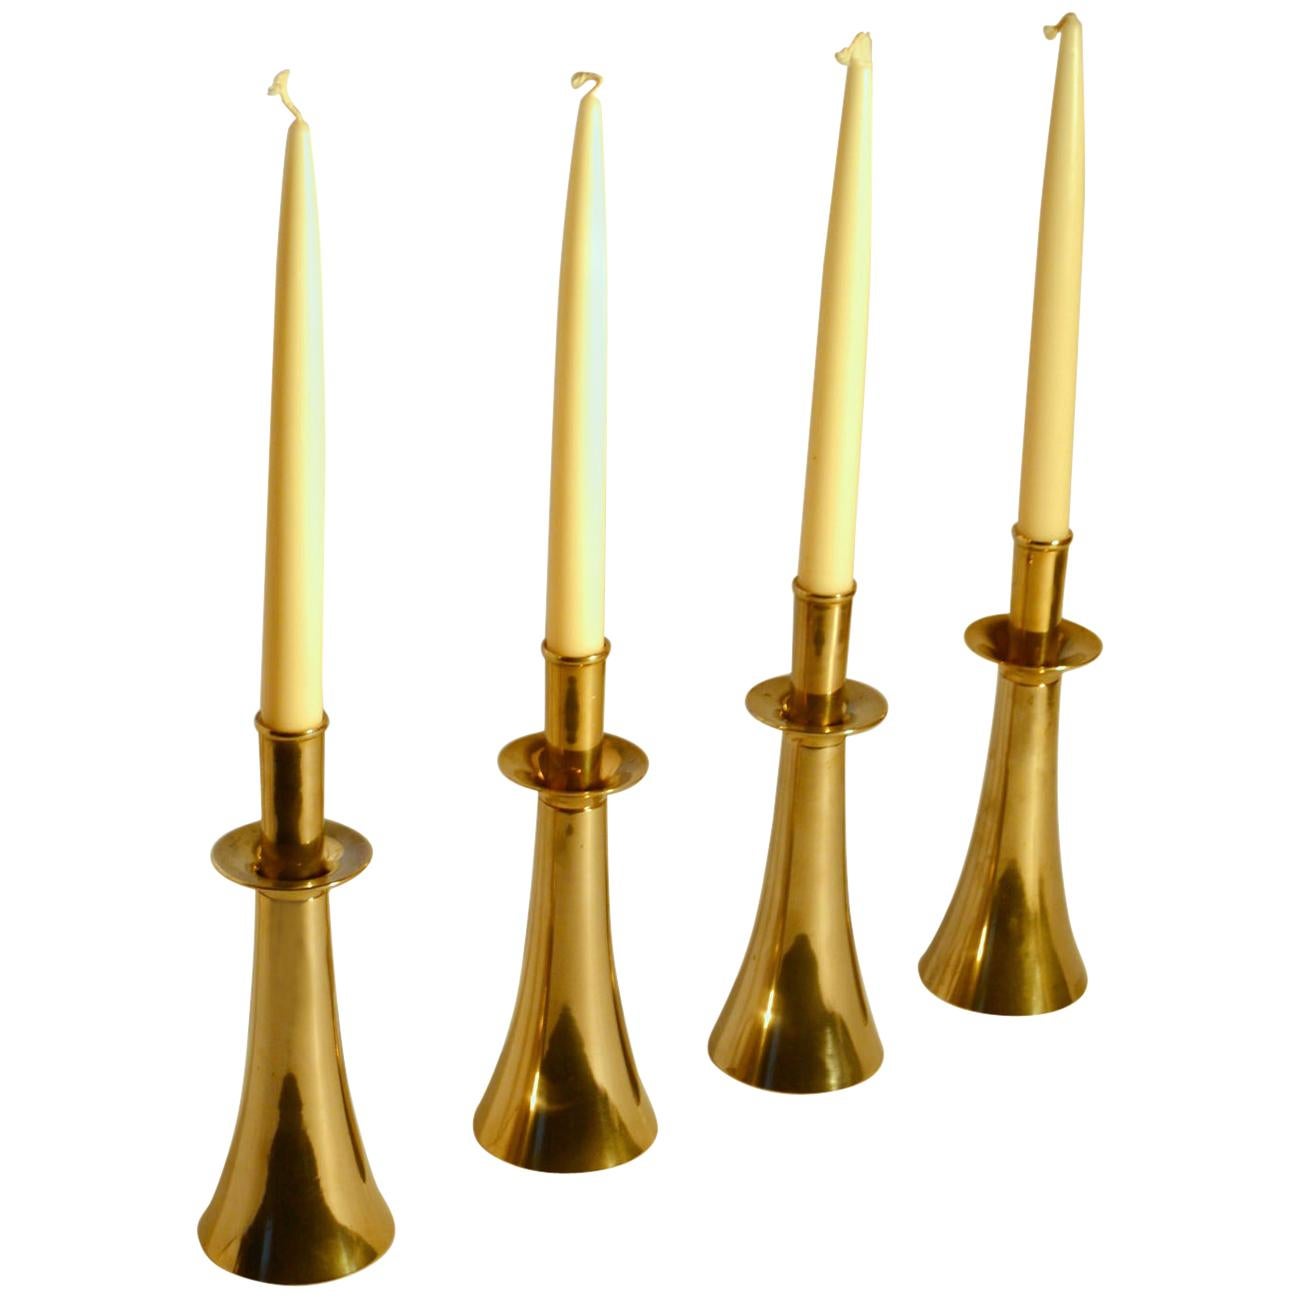 Four Scandinavian Modern Bronze 1960's Candle Holders by Harald Quistgaard 